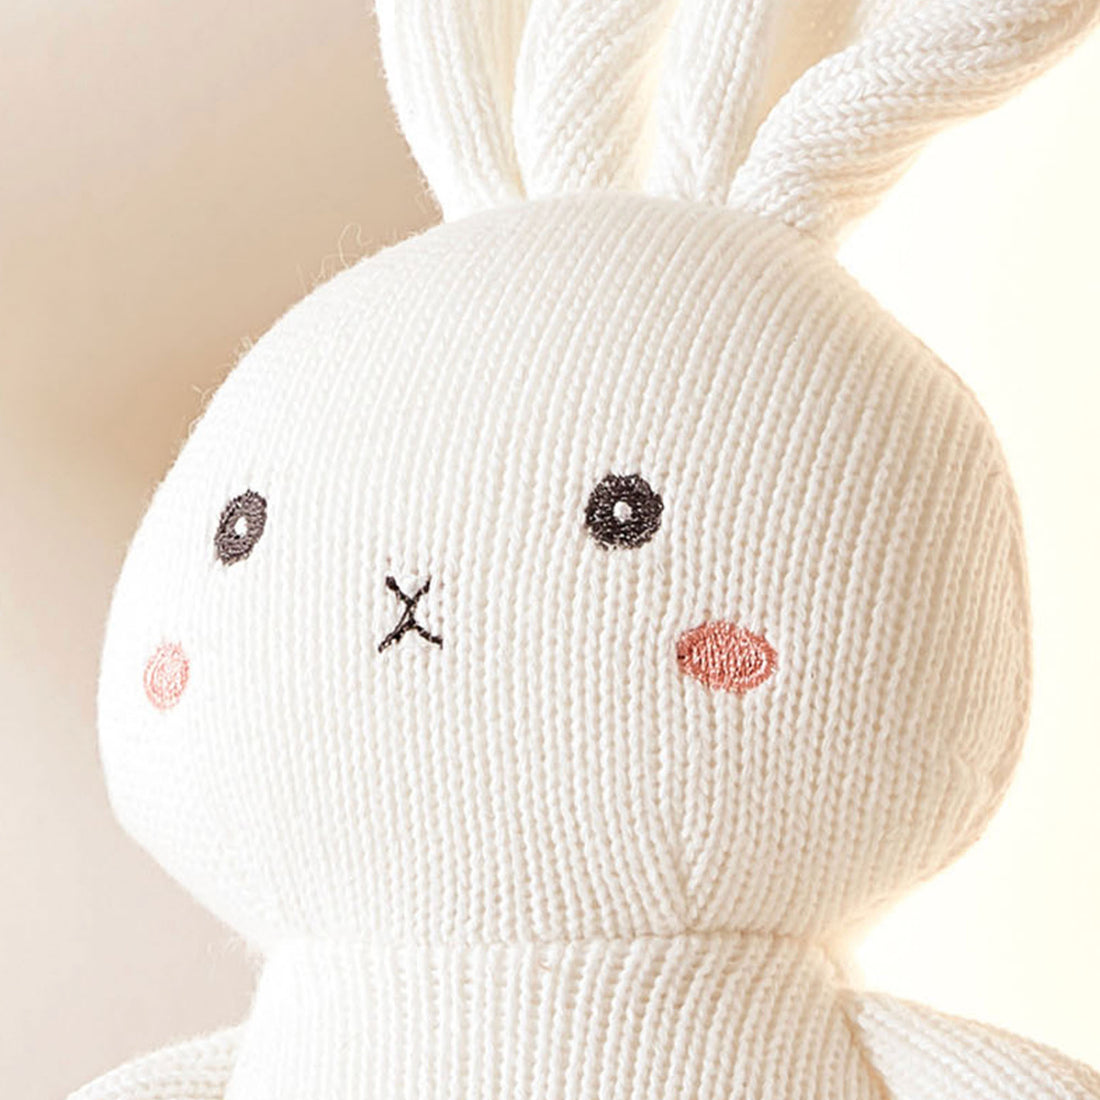 A close-up photo of a white knitted rabbit. The rabbit has pink stitching for its eyes, nose, and mouth. It has a pink cheek sewn on its chest.